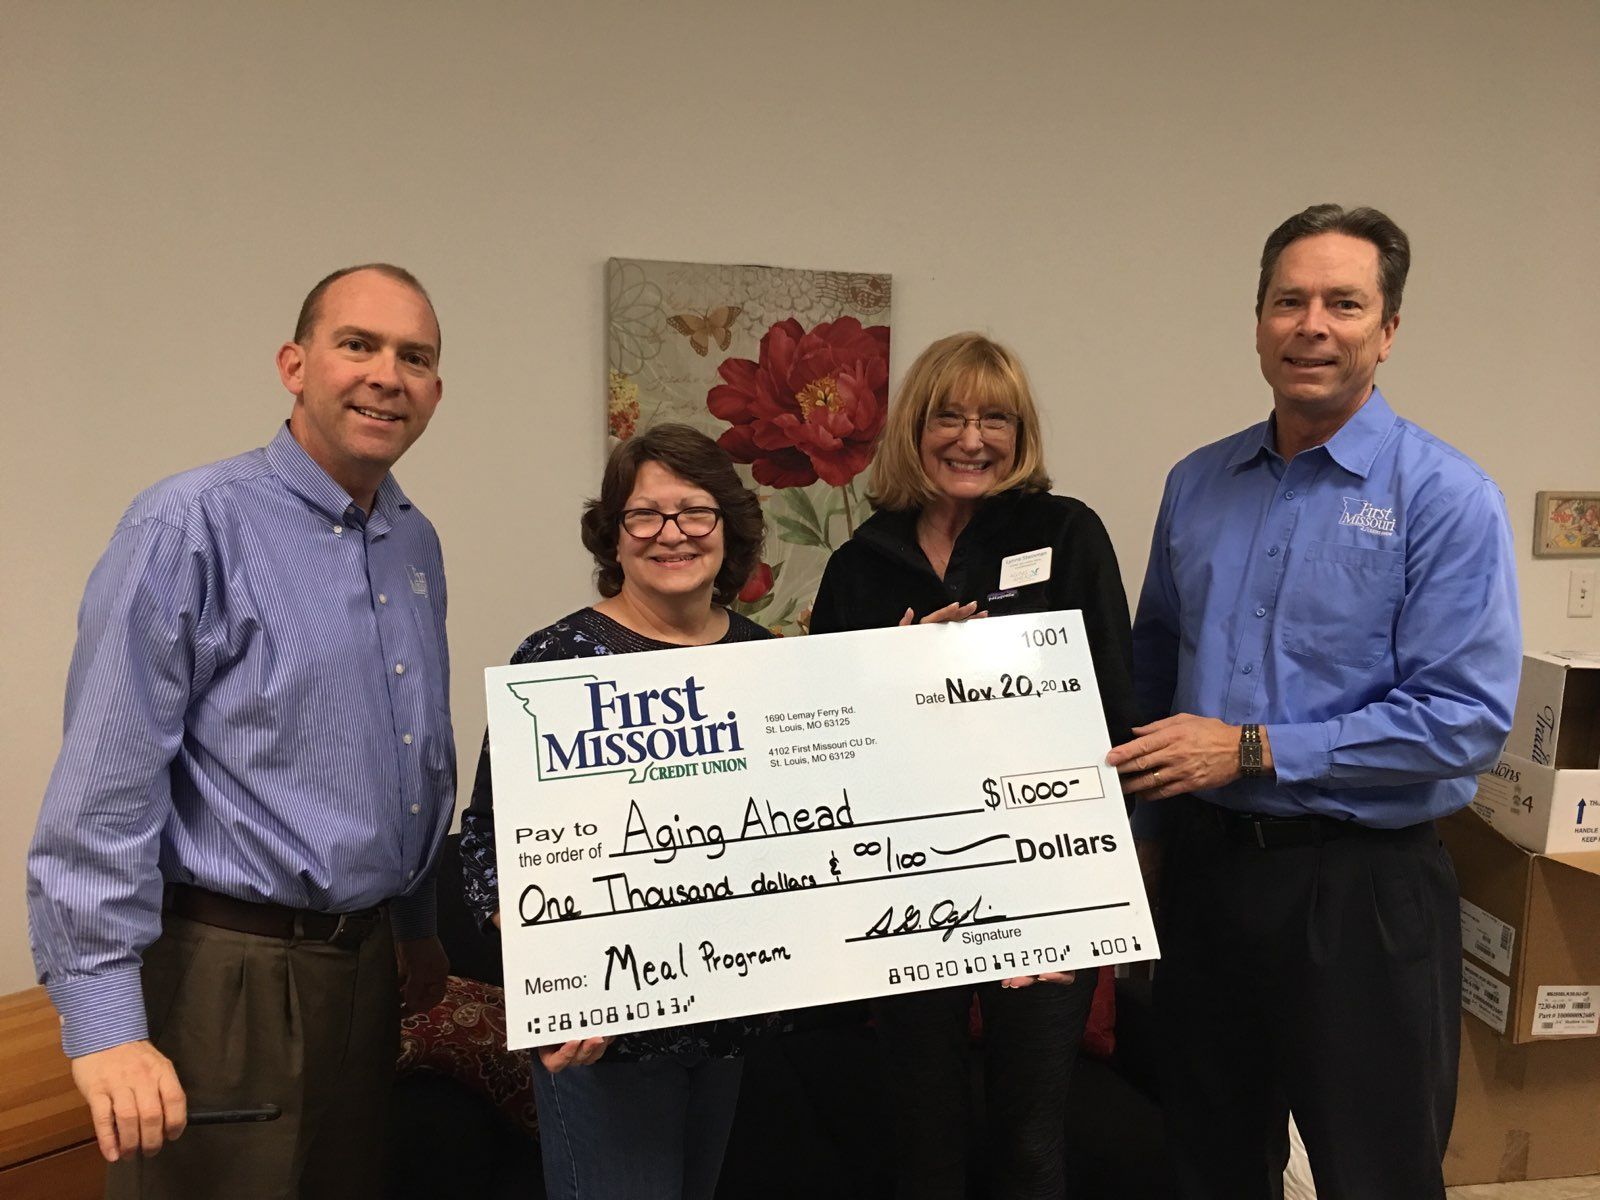 Aging Ahead received $1,000 for its Meals On Wheels program – enough to provide 100 meals!